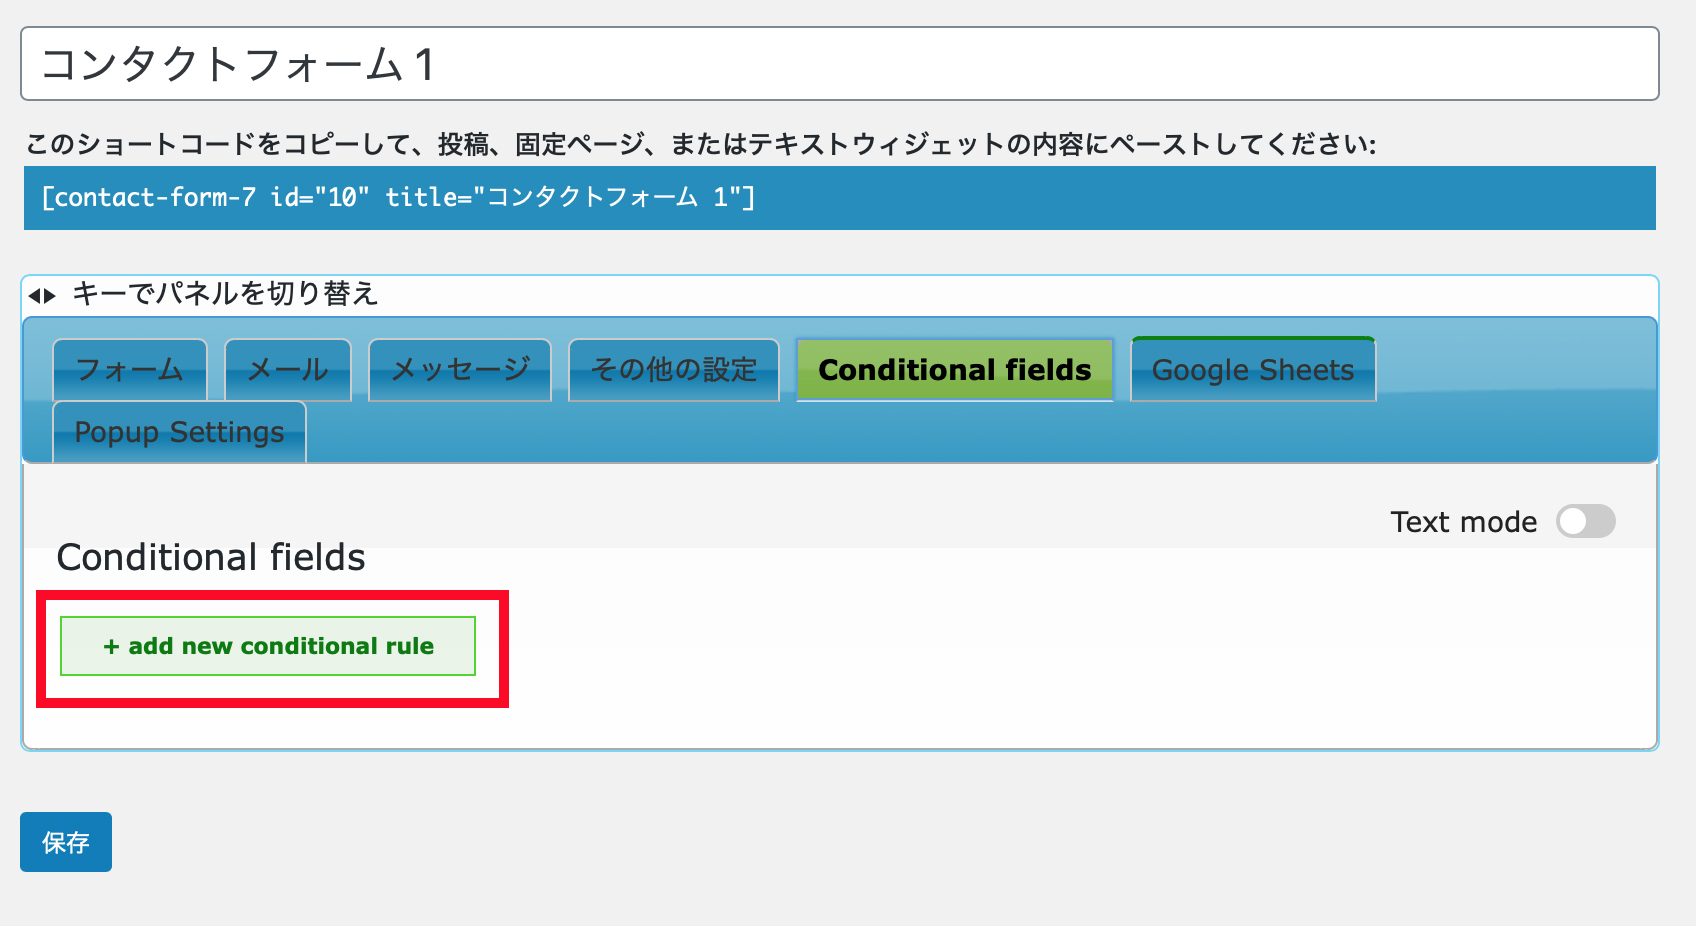 Conditional fields